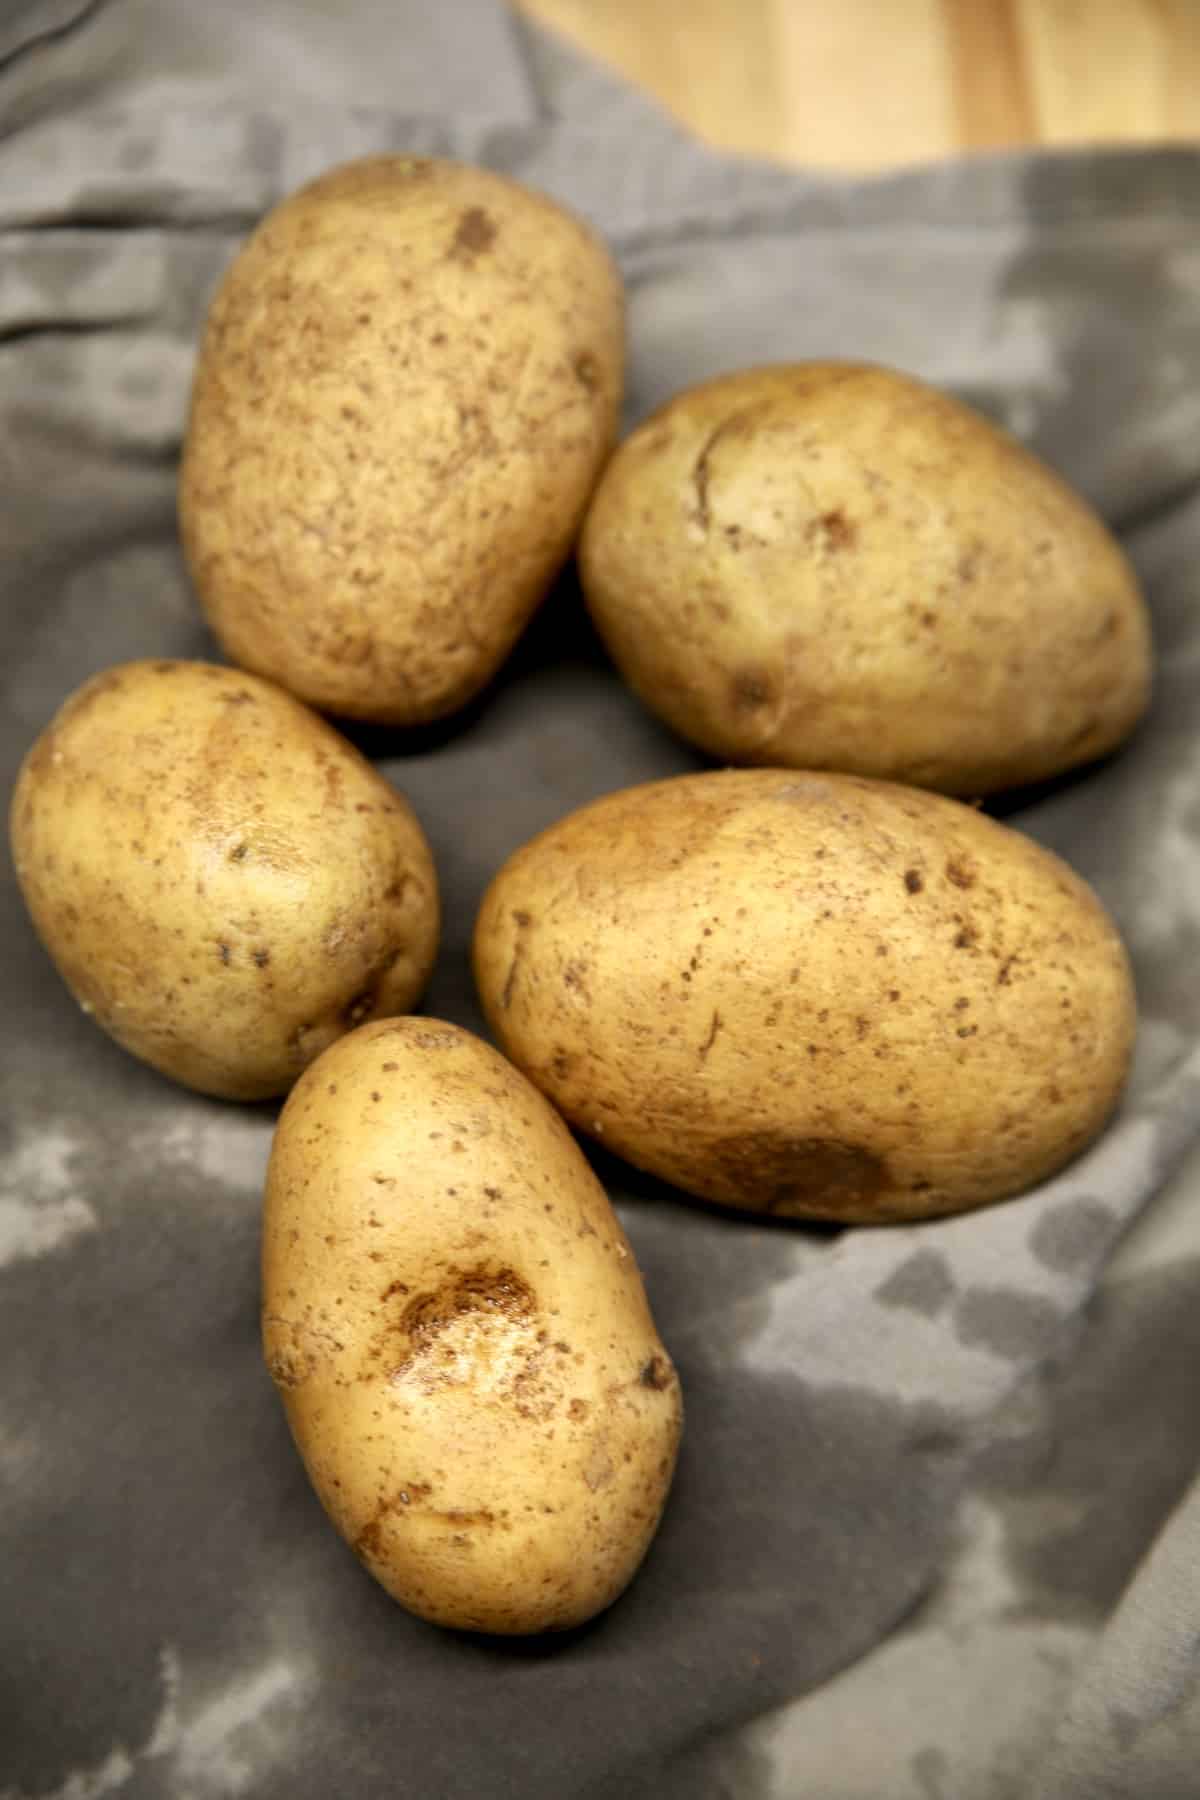 4 Yukon gold potatoes, washed and drying on a gray towel.